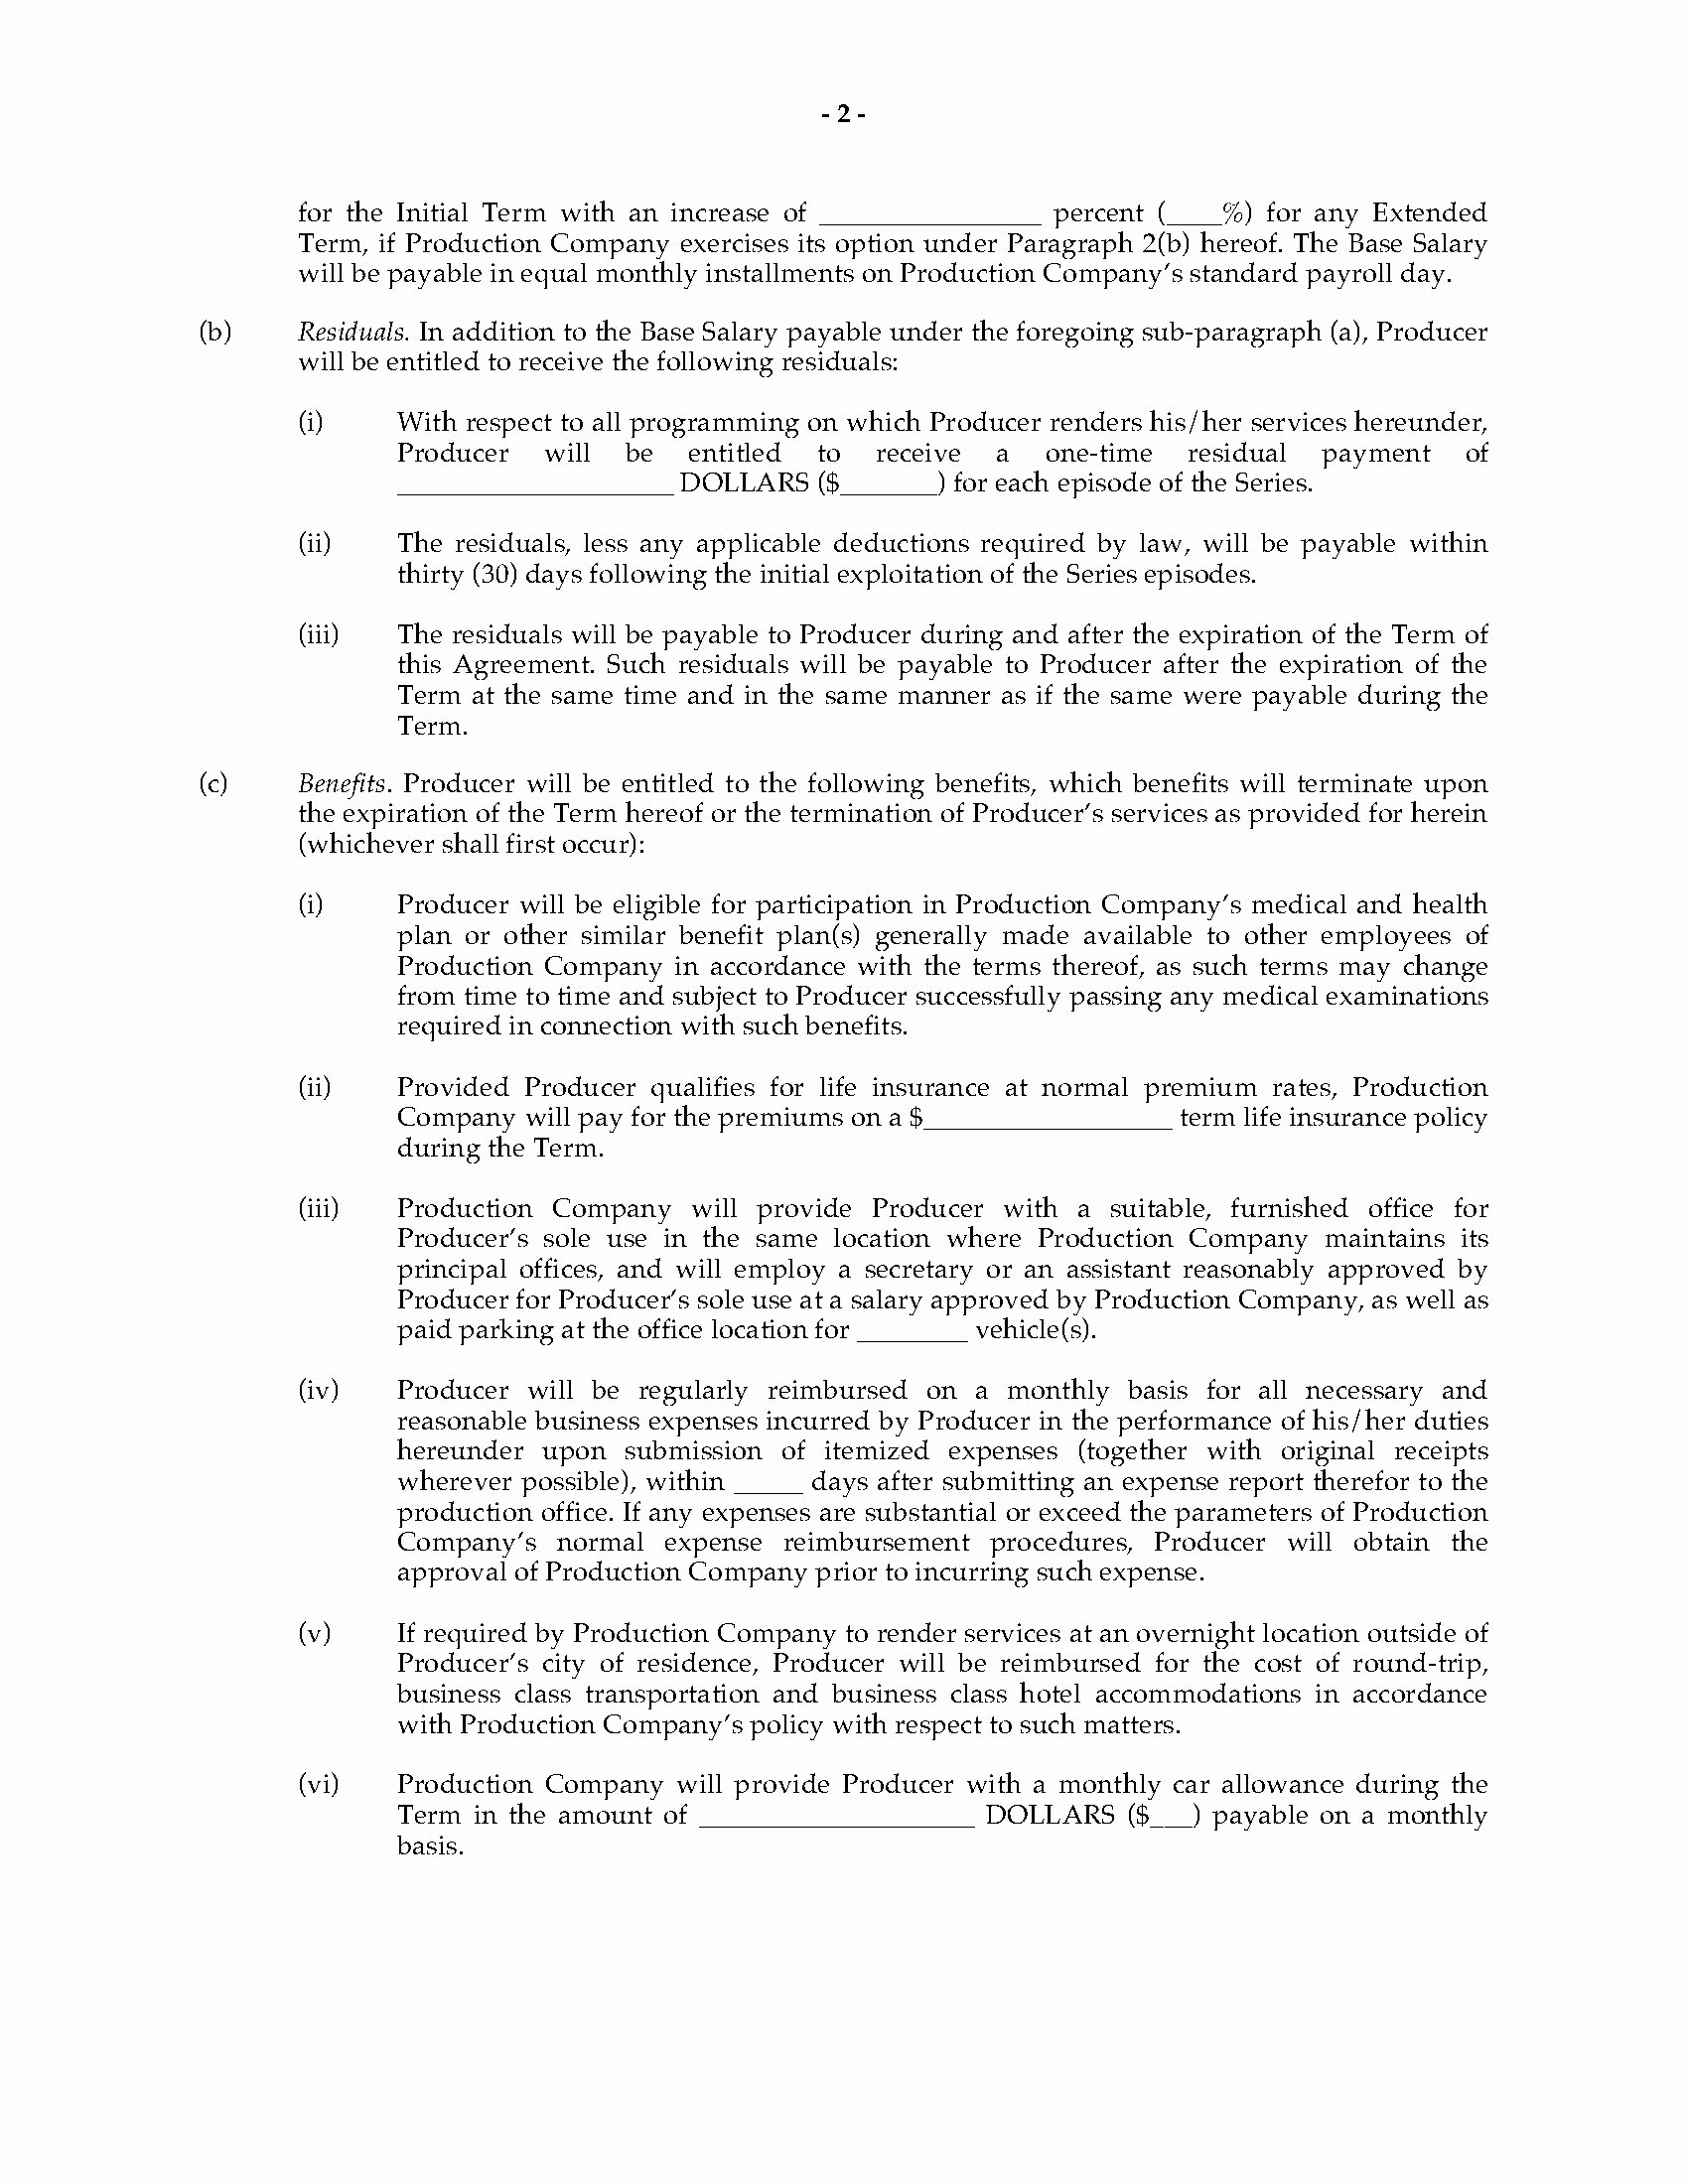 Music Producer Agreement Template New Producer Agreement for Tv Series